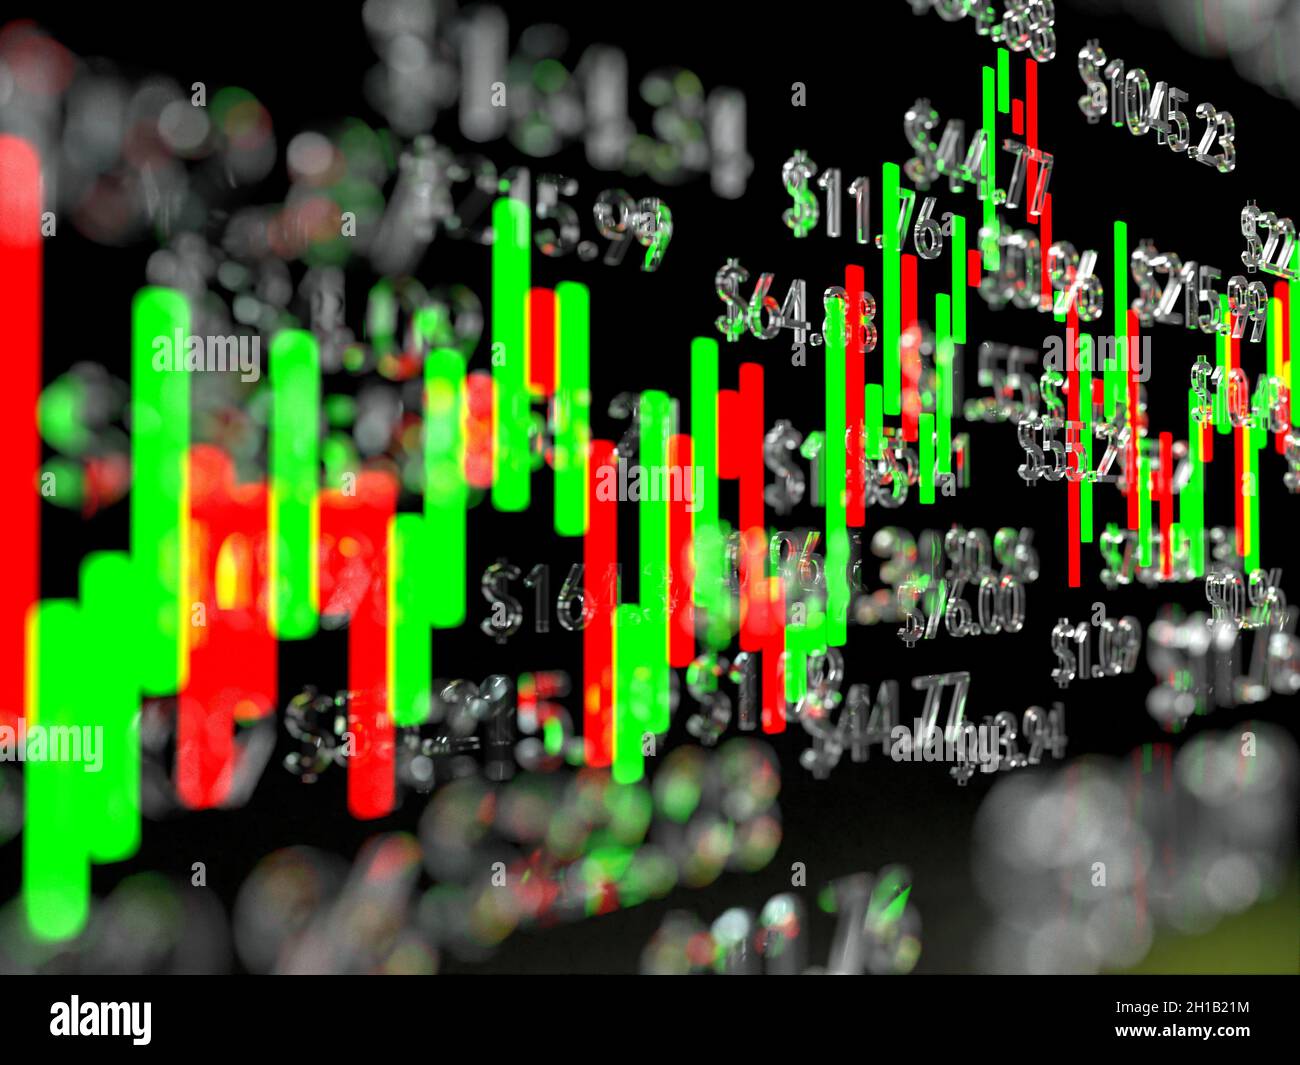 A stock market chart with stock prices Stock Photo